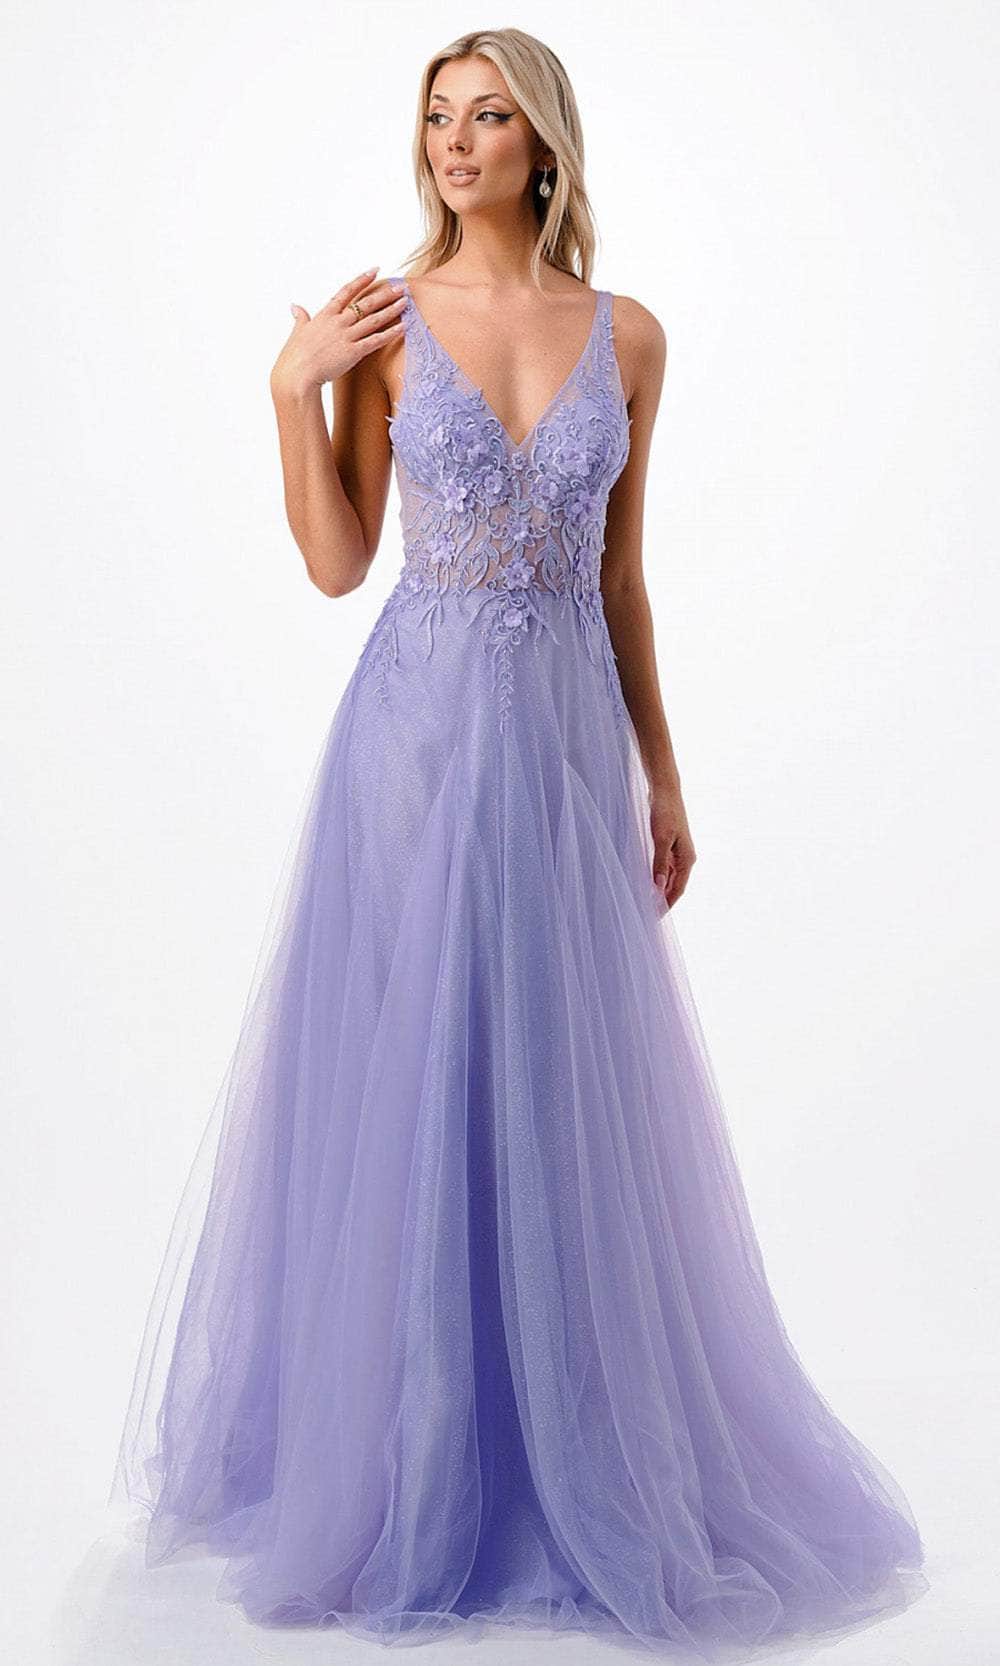 Image of Aspeed Design P2109 - Embroidered A-Line Prom Dress